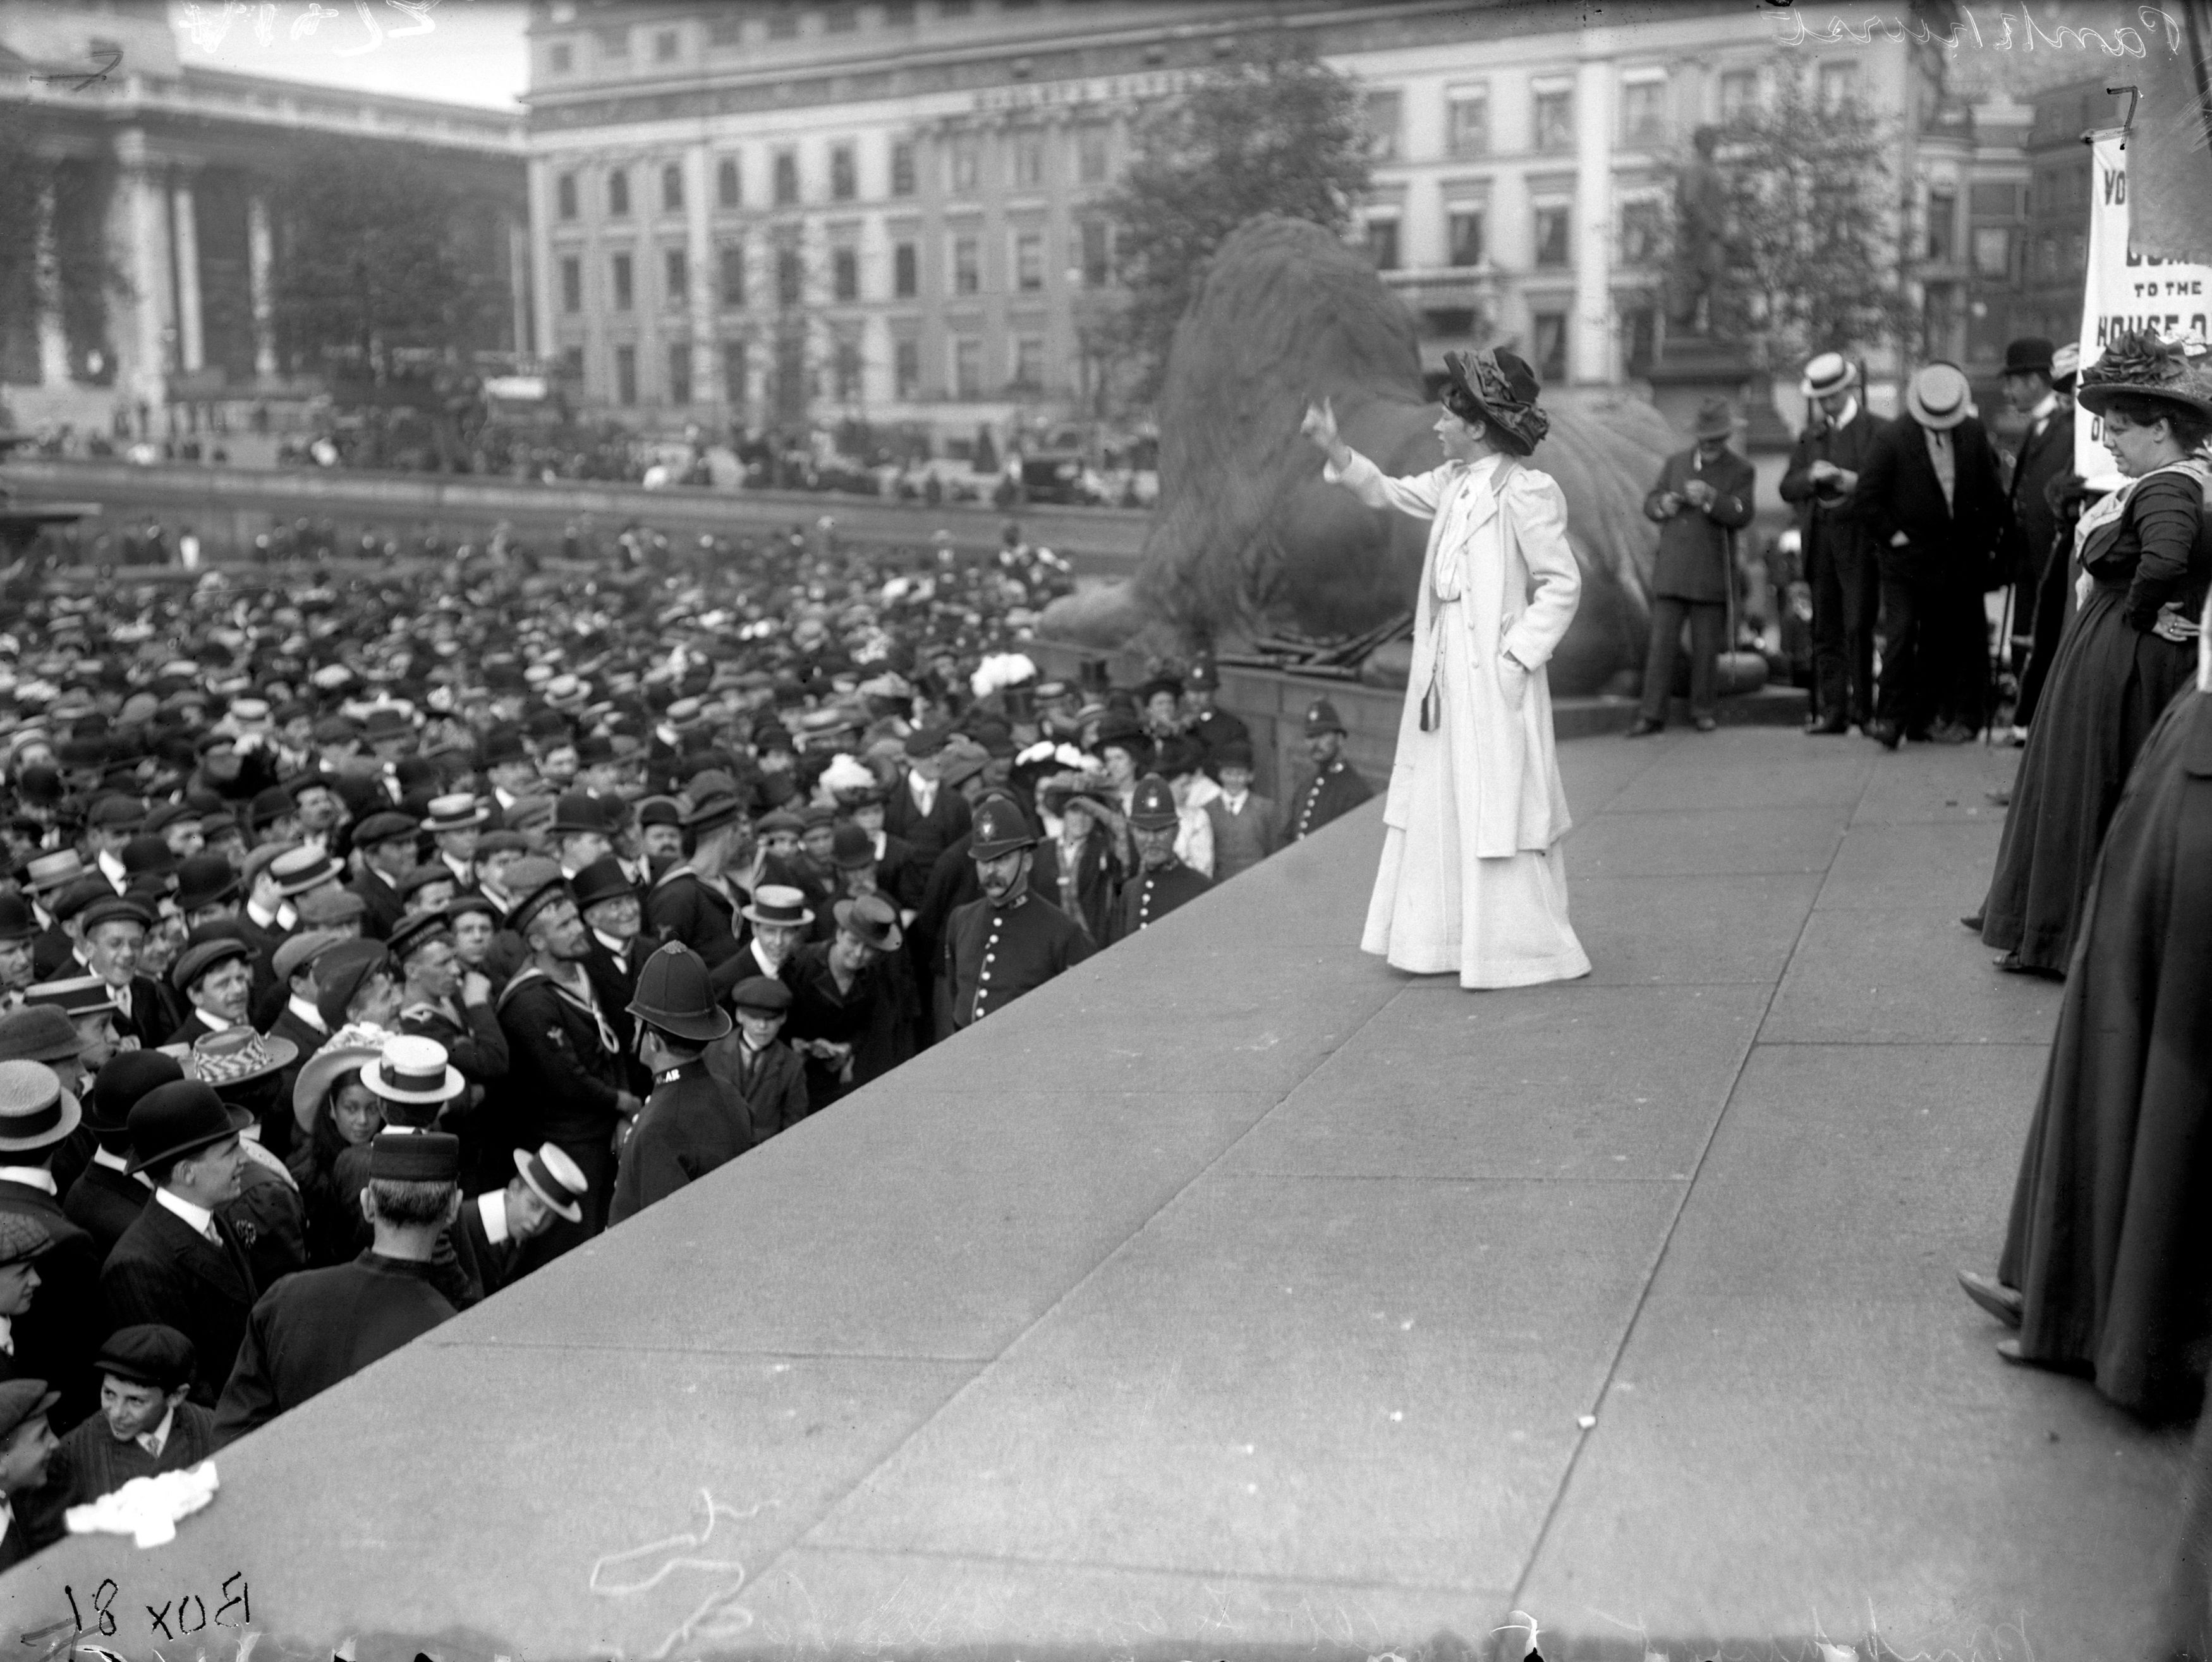 Suffragette Miss Pankhurst addressing the crowd in Trafalgar Square during a rally (PA)